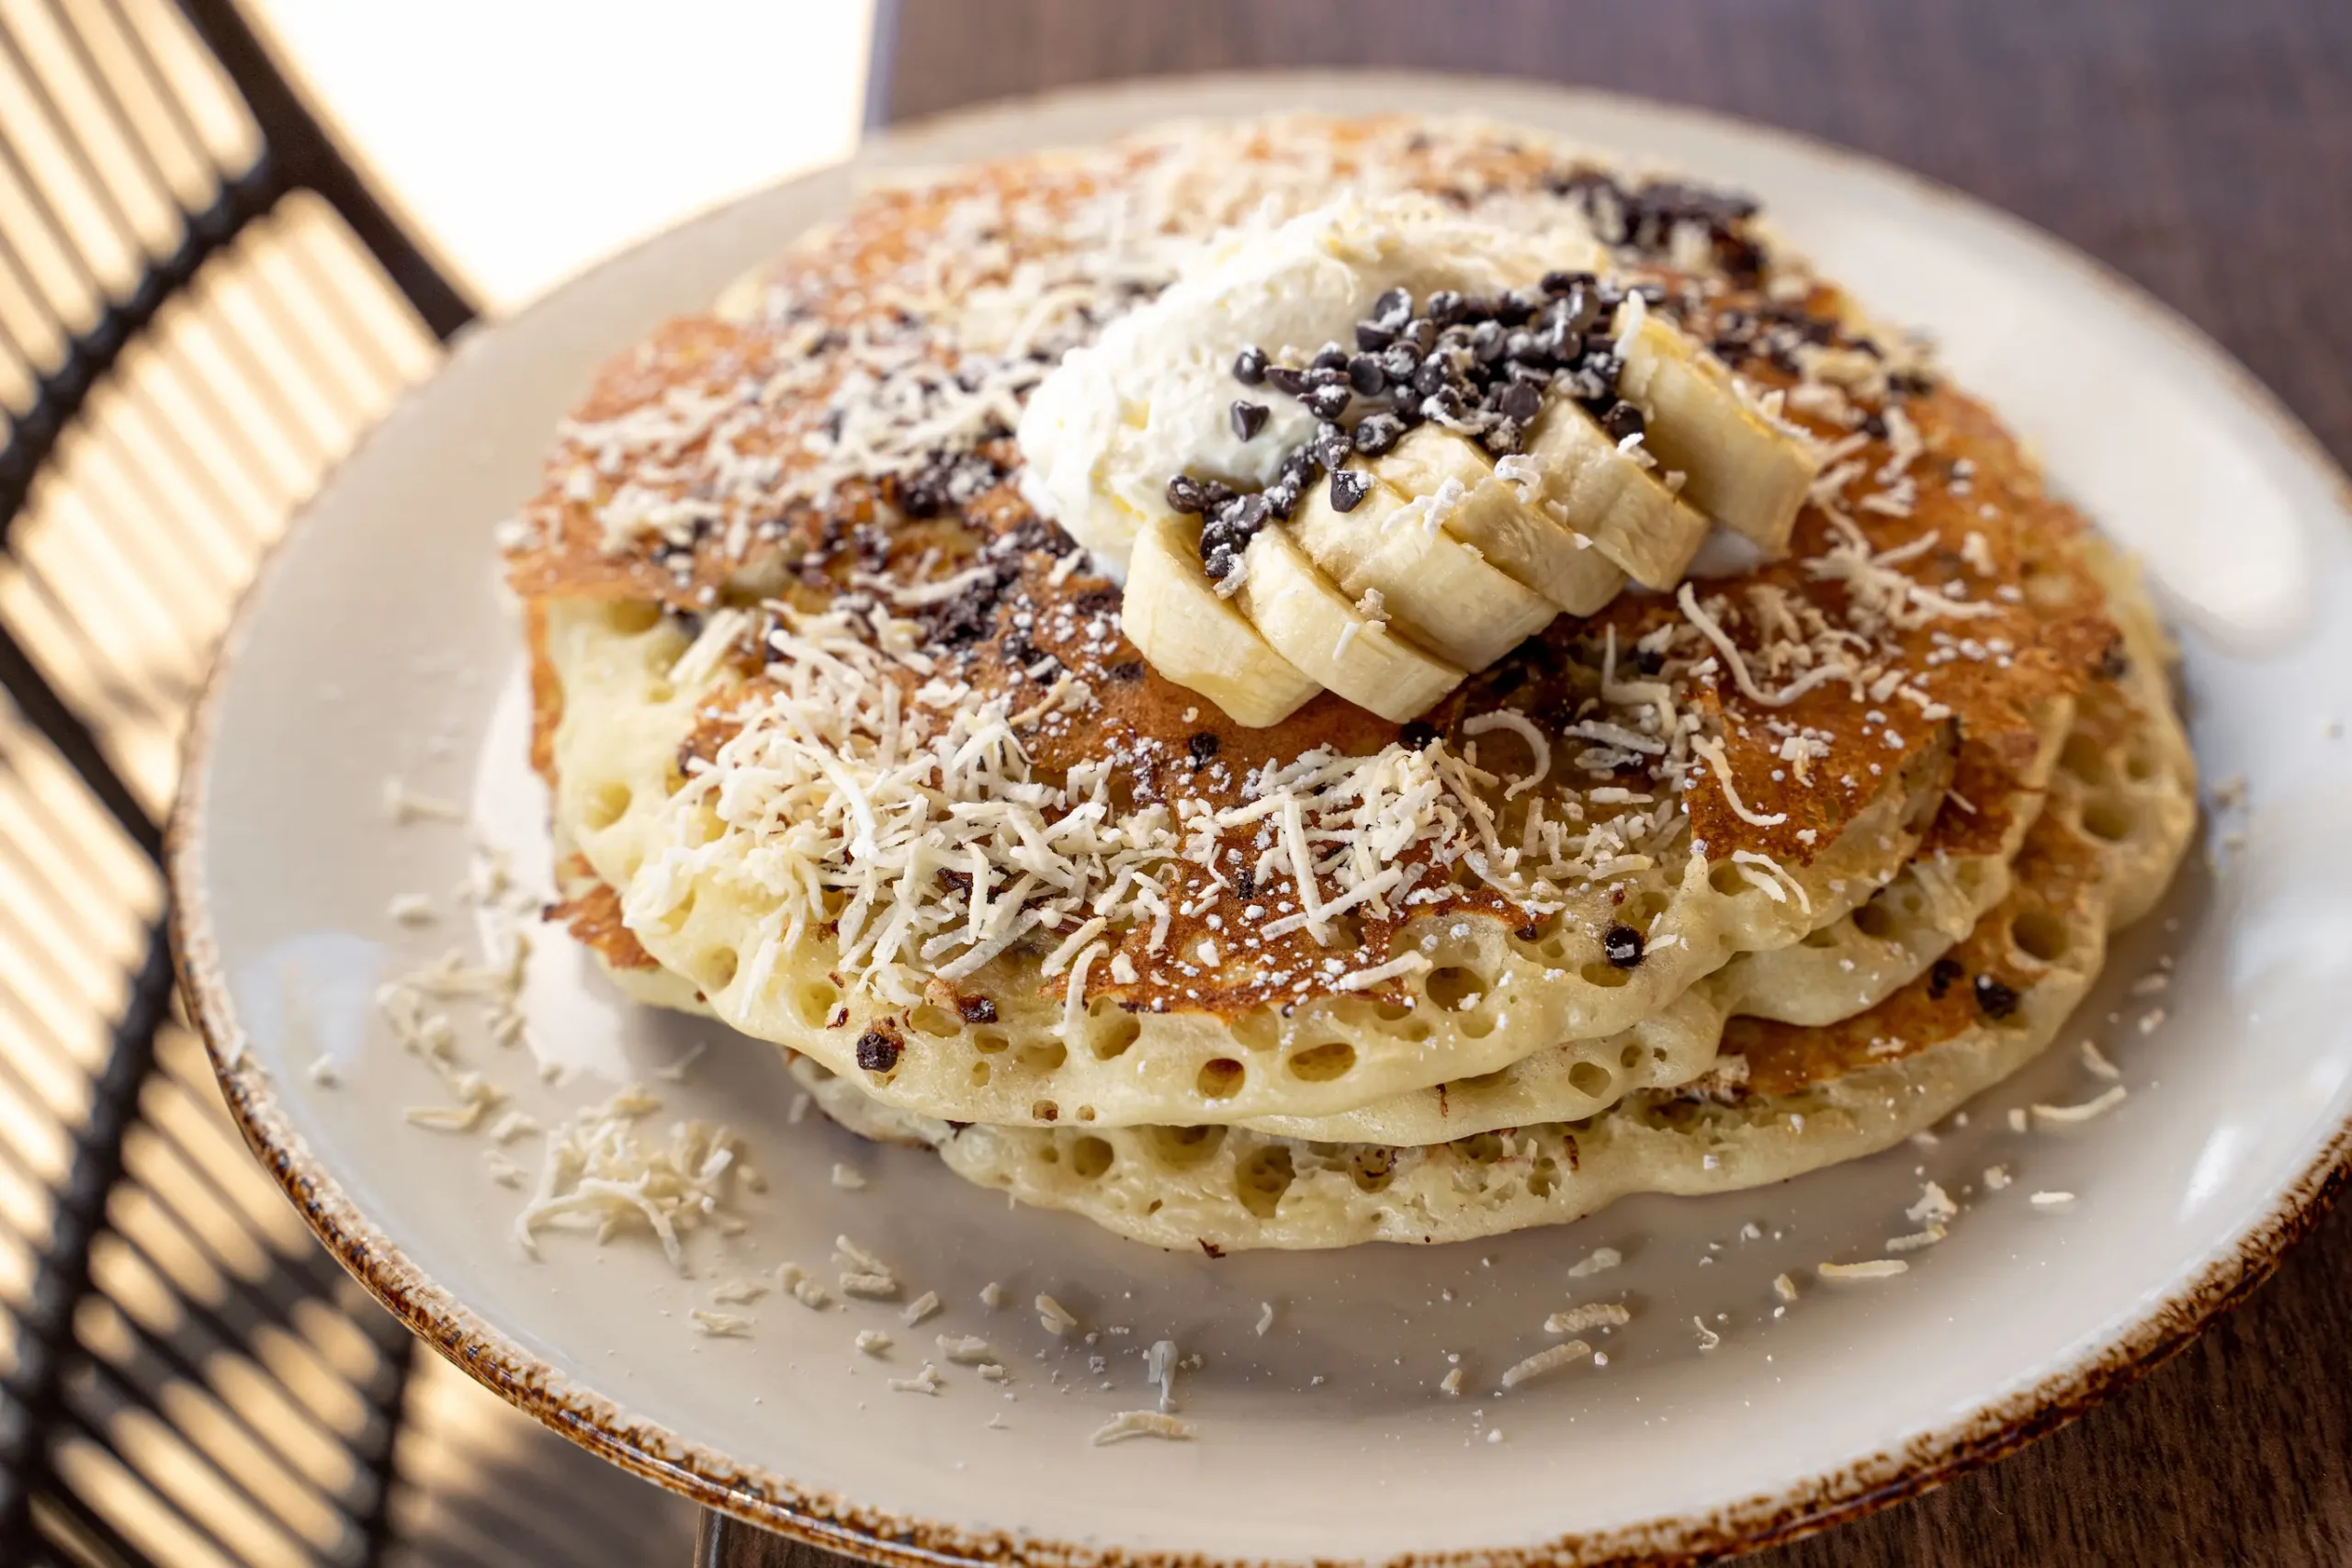 Chocolate chip pancakes with bananas and coconut flakes